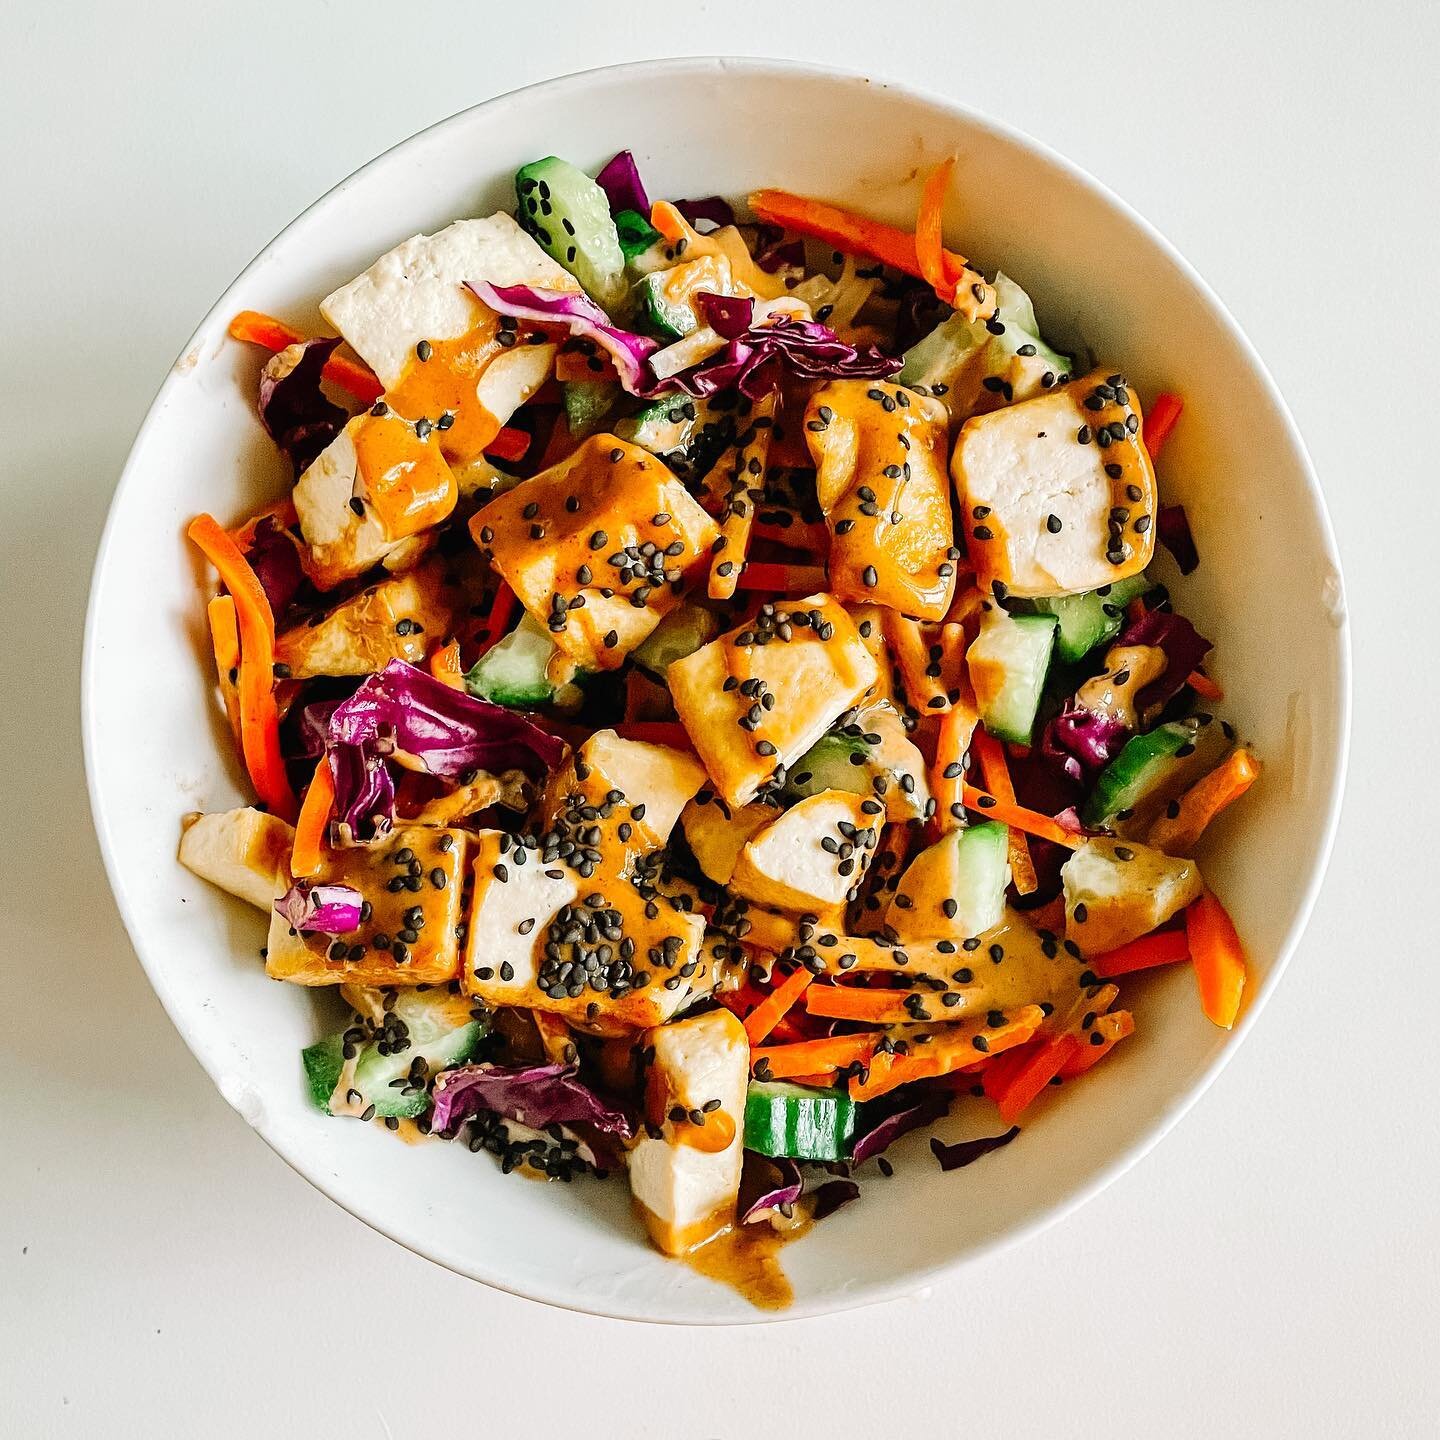 Looking for a high protein vegan lunch option that is quick &amp; easy? Here is a great one &amp; it happens to be freaking delicious as well. Win/Win! 😋

This Thai Tofu Bowl can be enjoyed for lunch or dinner &amp; what I love most about it is how 